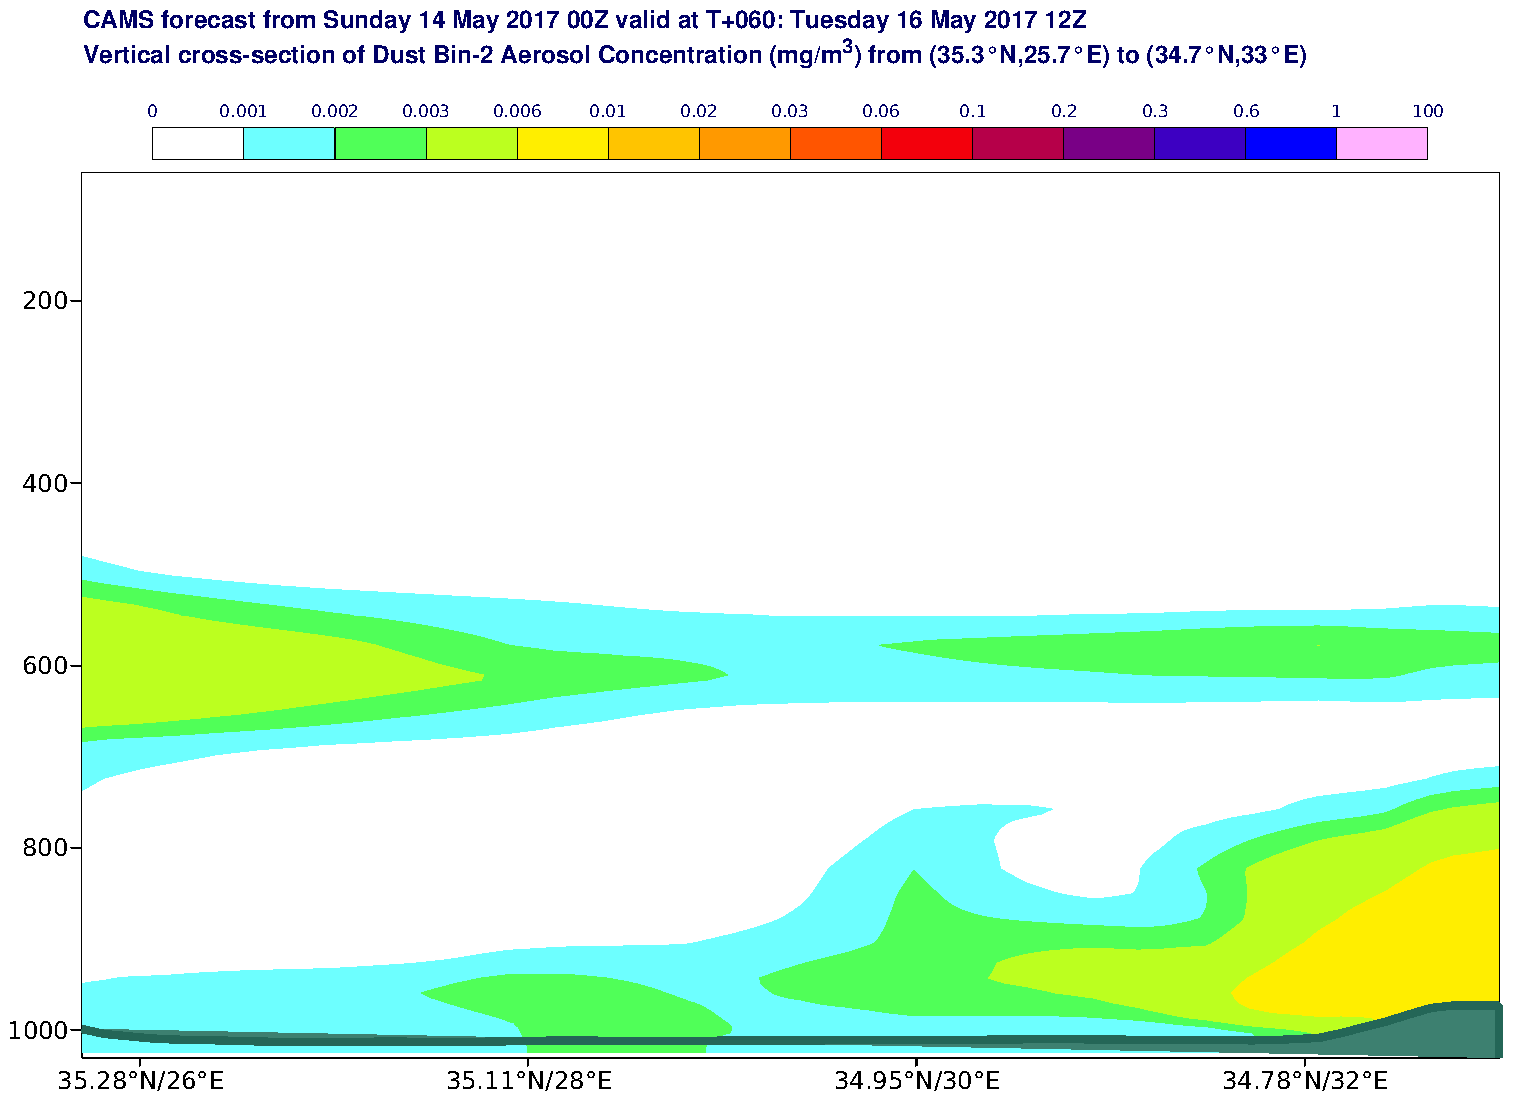 Vertical cross-section of Dust Bin-2 Aerosol Concentration (mg/m3) valid at T60 - 2017-05-16 12:00